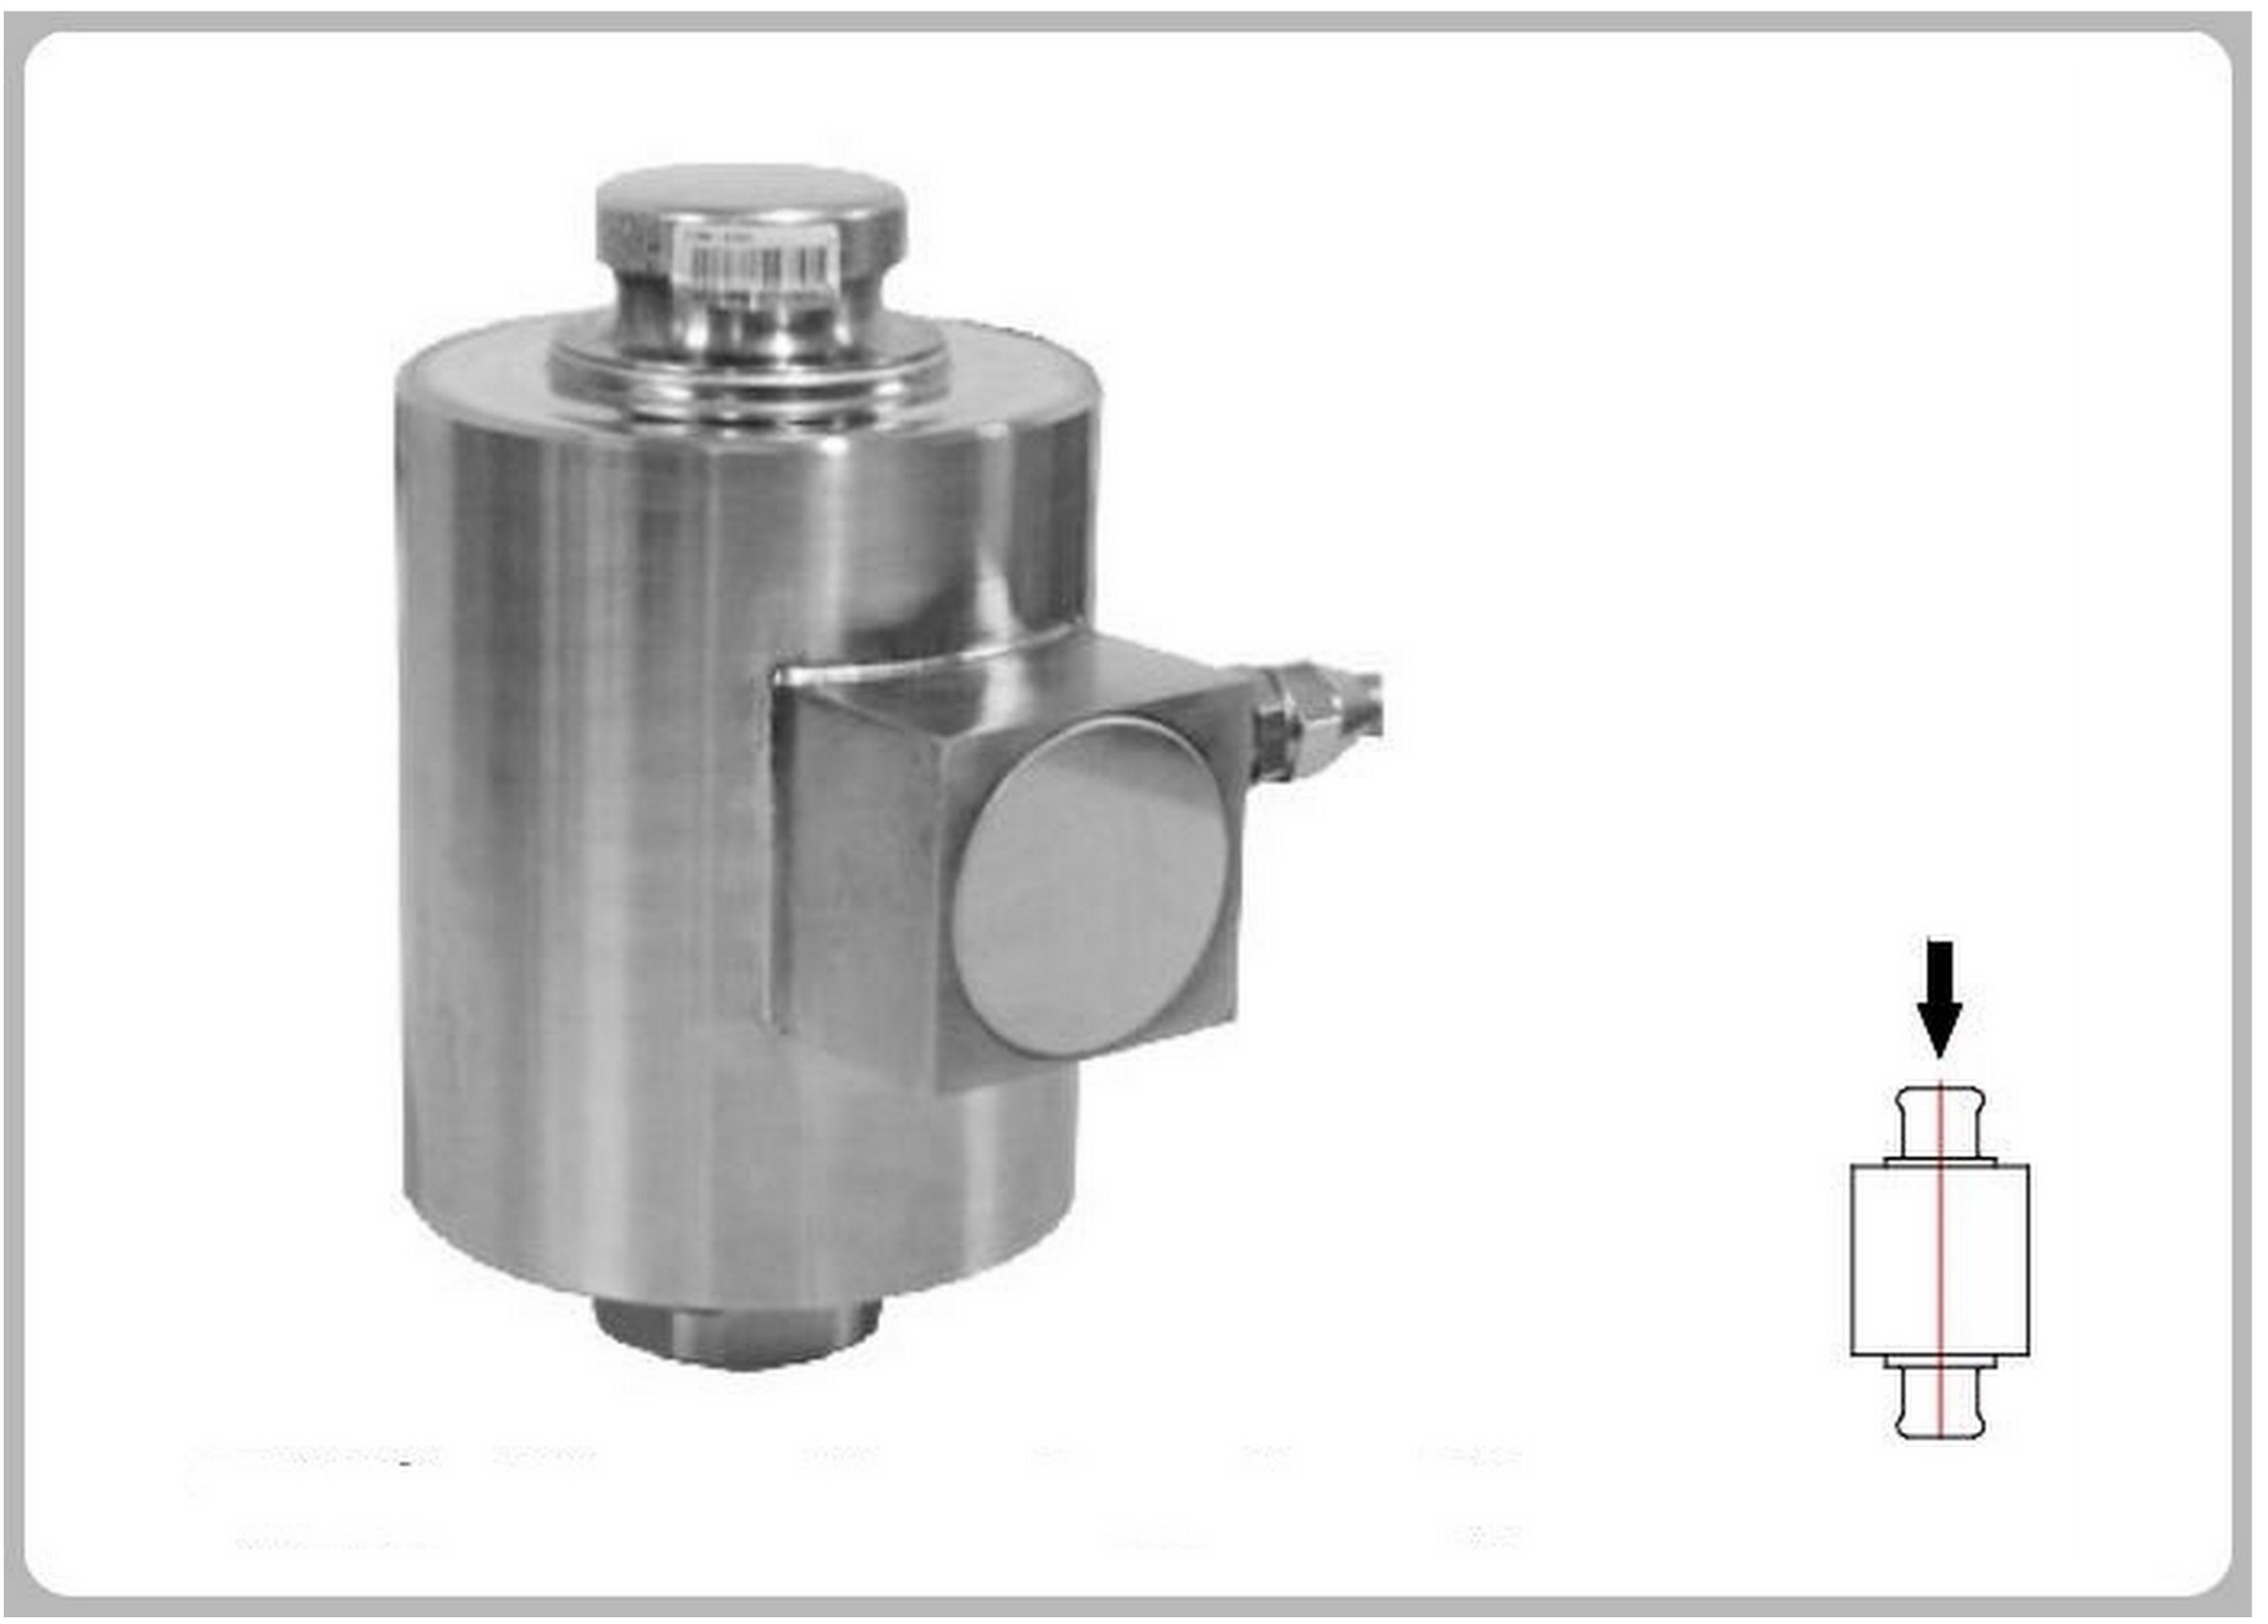 MC8214 LOAD CELL & FORCE TRANSDUCER